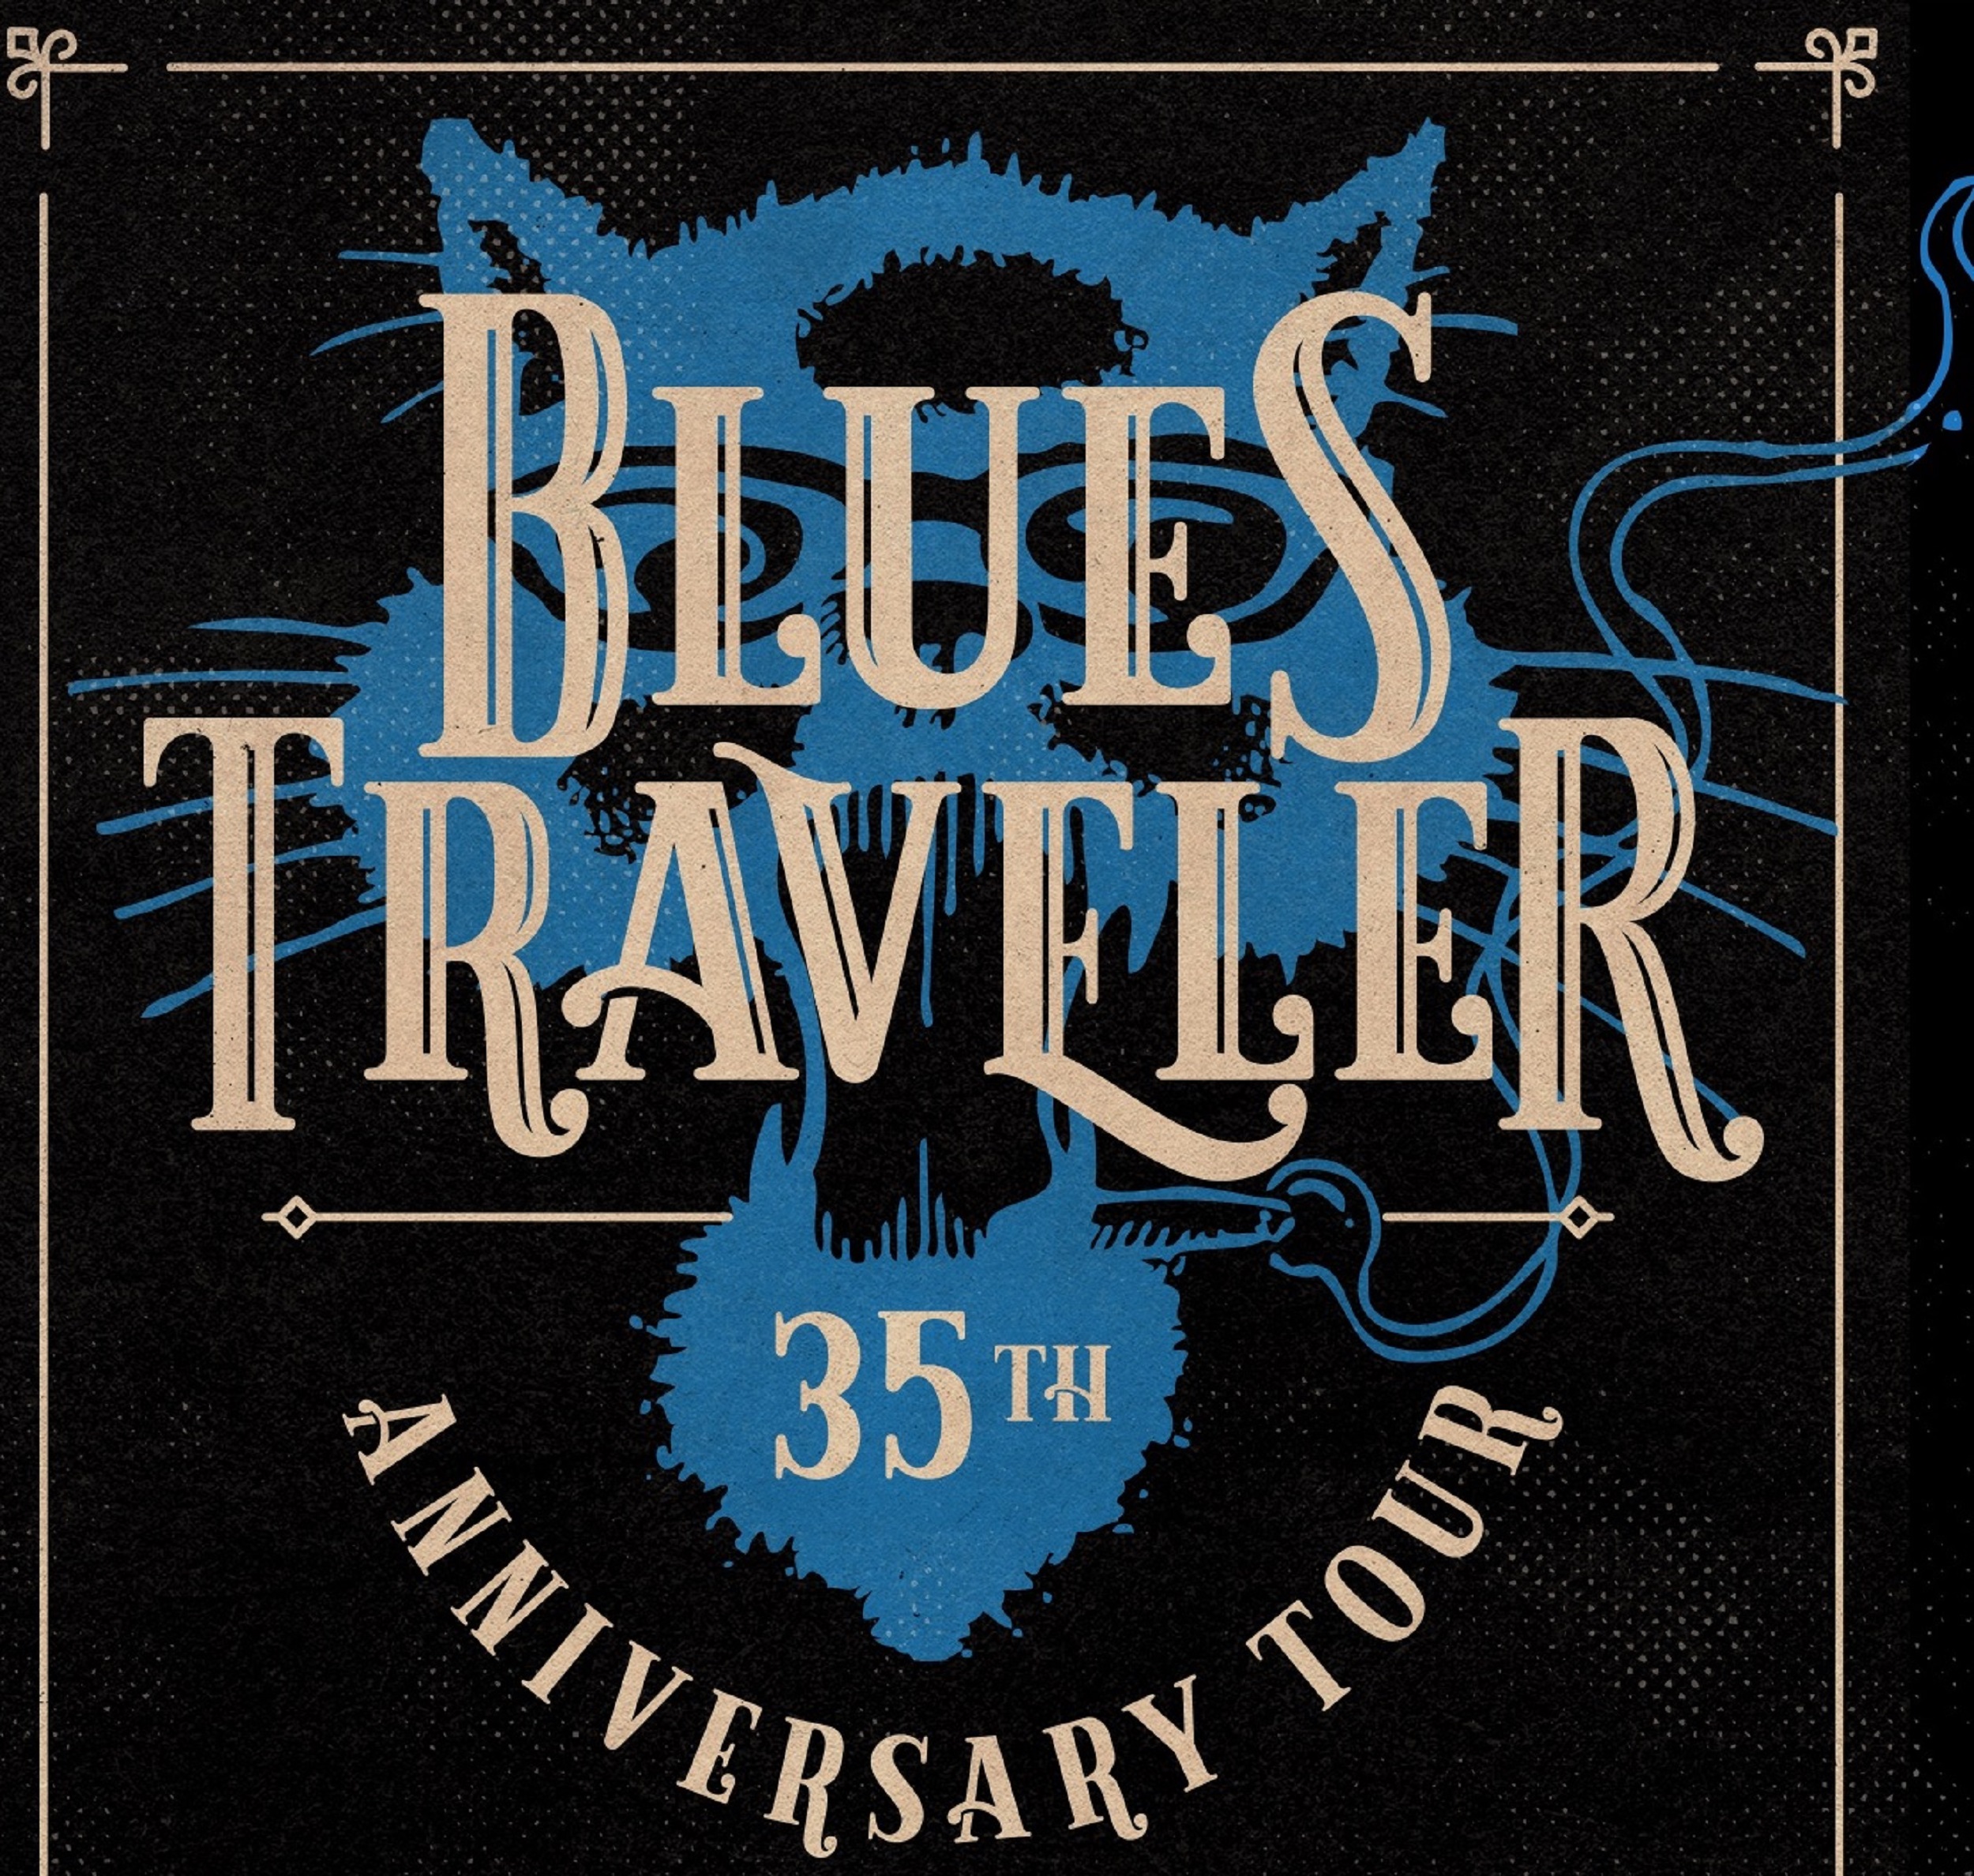 Blues Traveler Announces Additional 35th Anniversary Dates